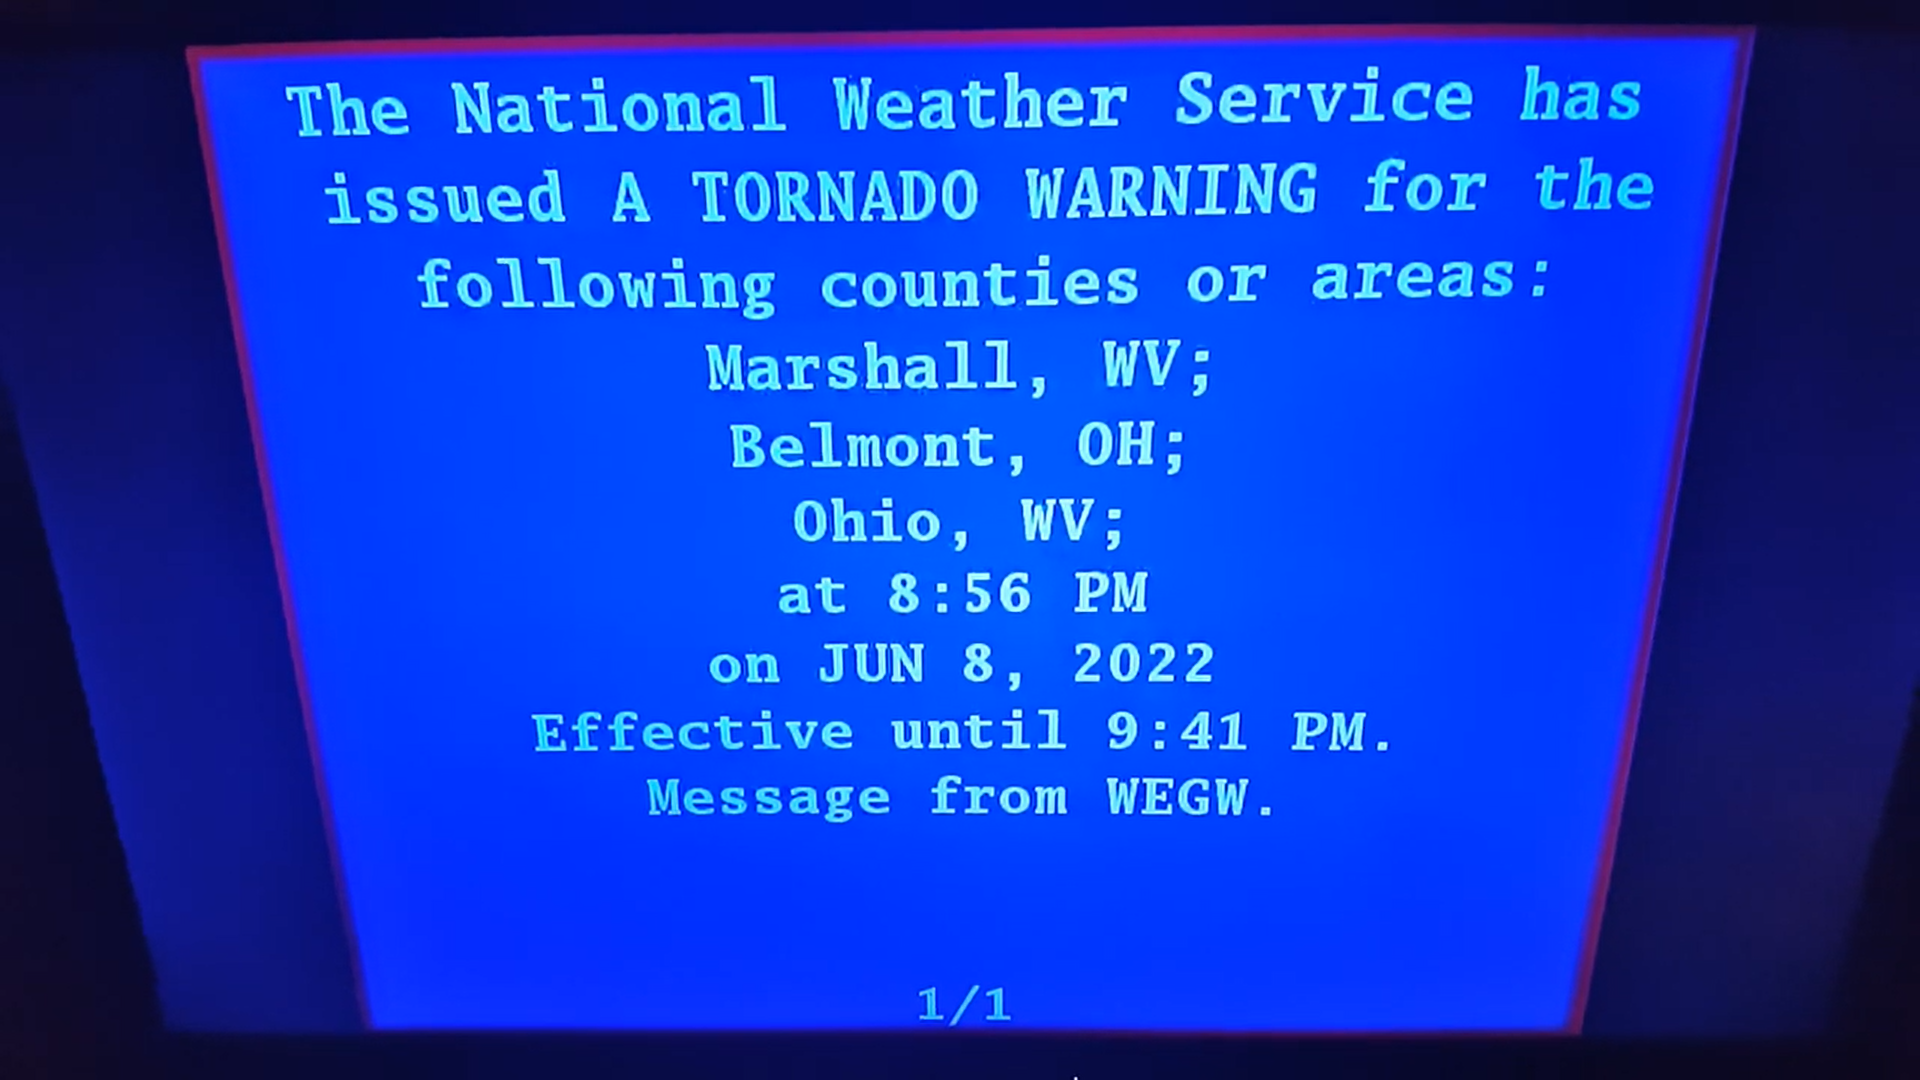 https://static.wikia.nocookie.net/emergencyalertsystem/images/a/ab/Tornado_Warning_Marshall_County_WV.png/revision/latest?cb=20221215185518